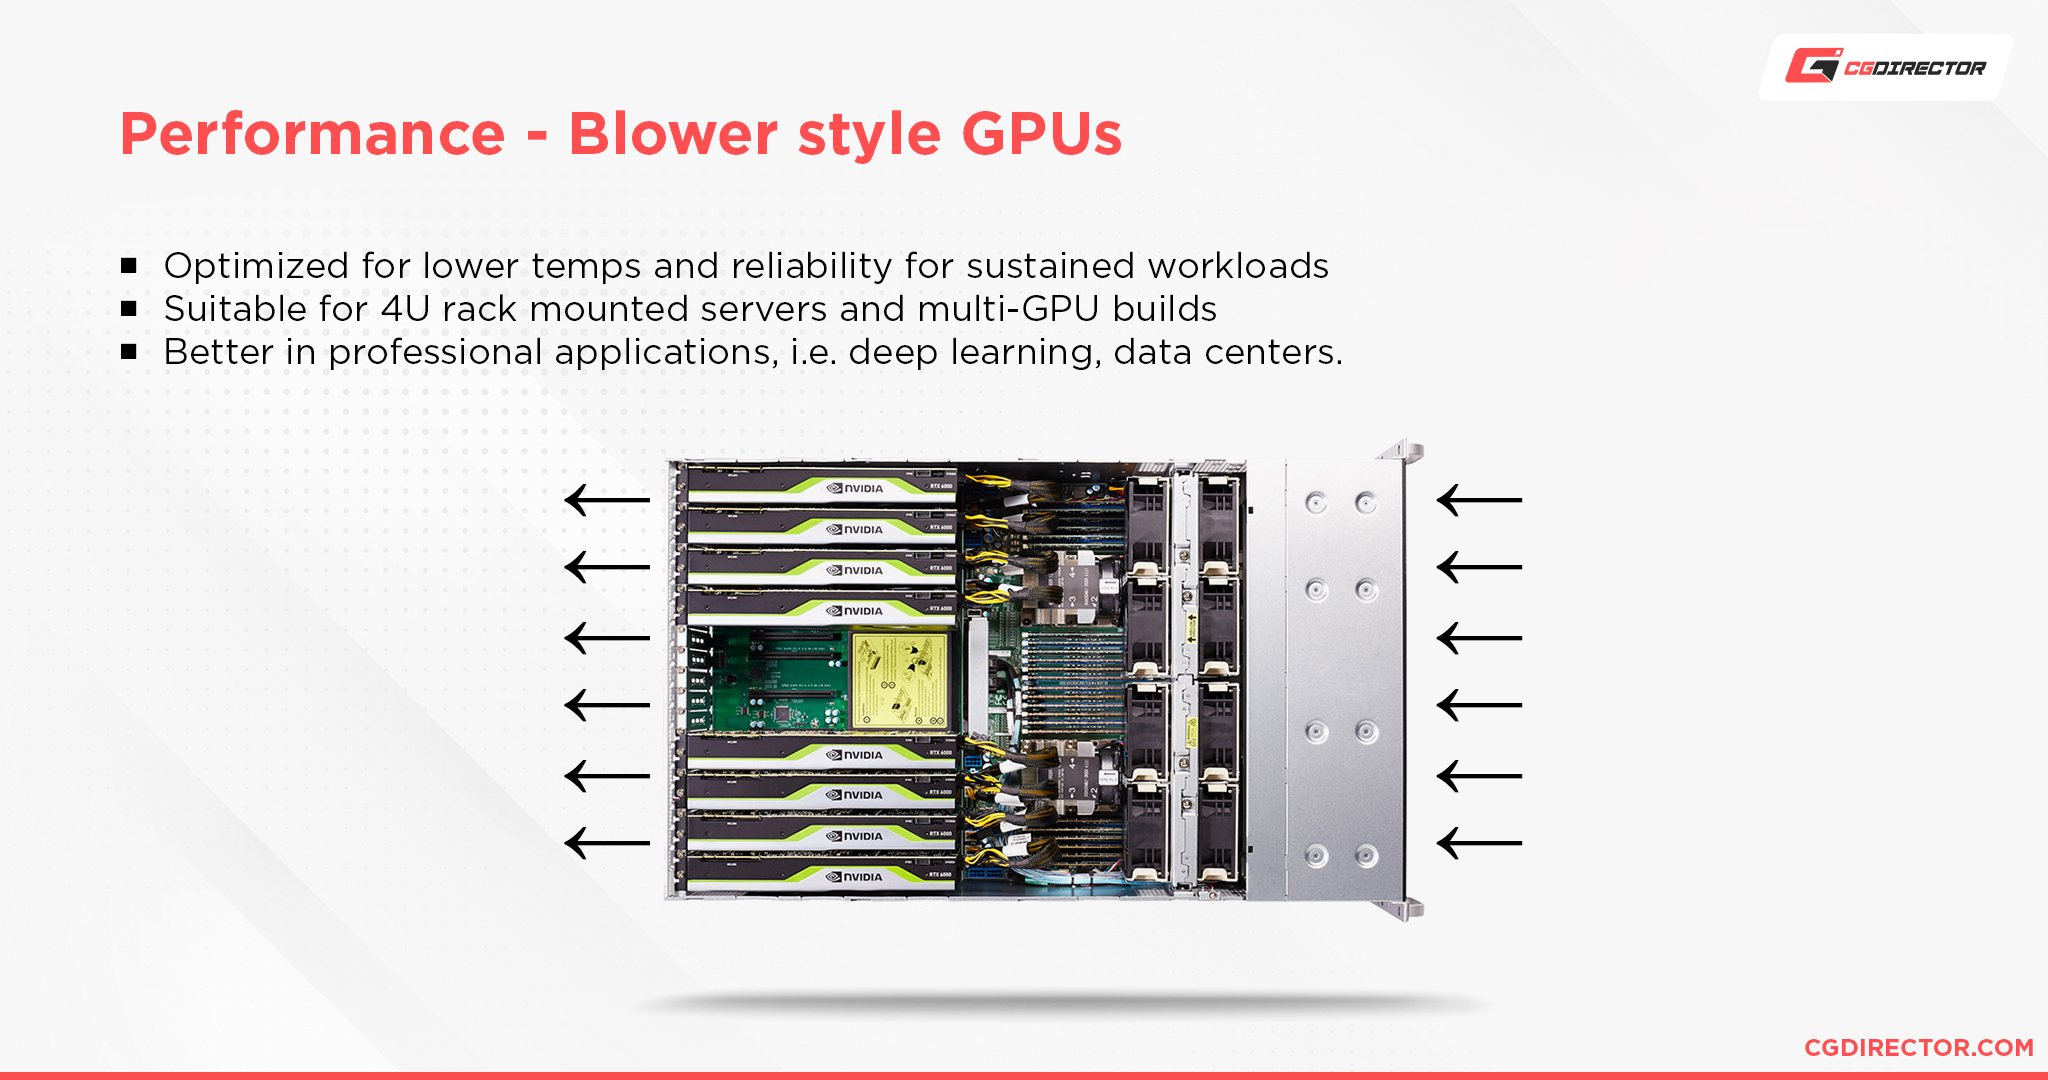 Performance and use cases - Blower style GPUs